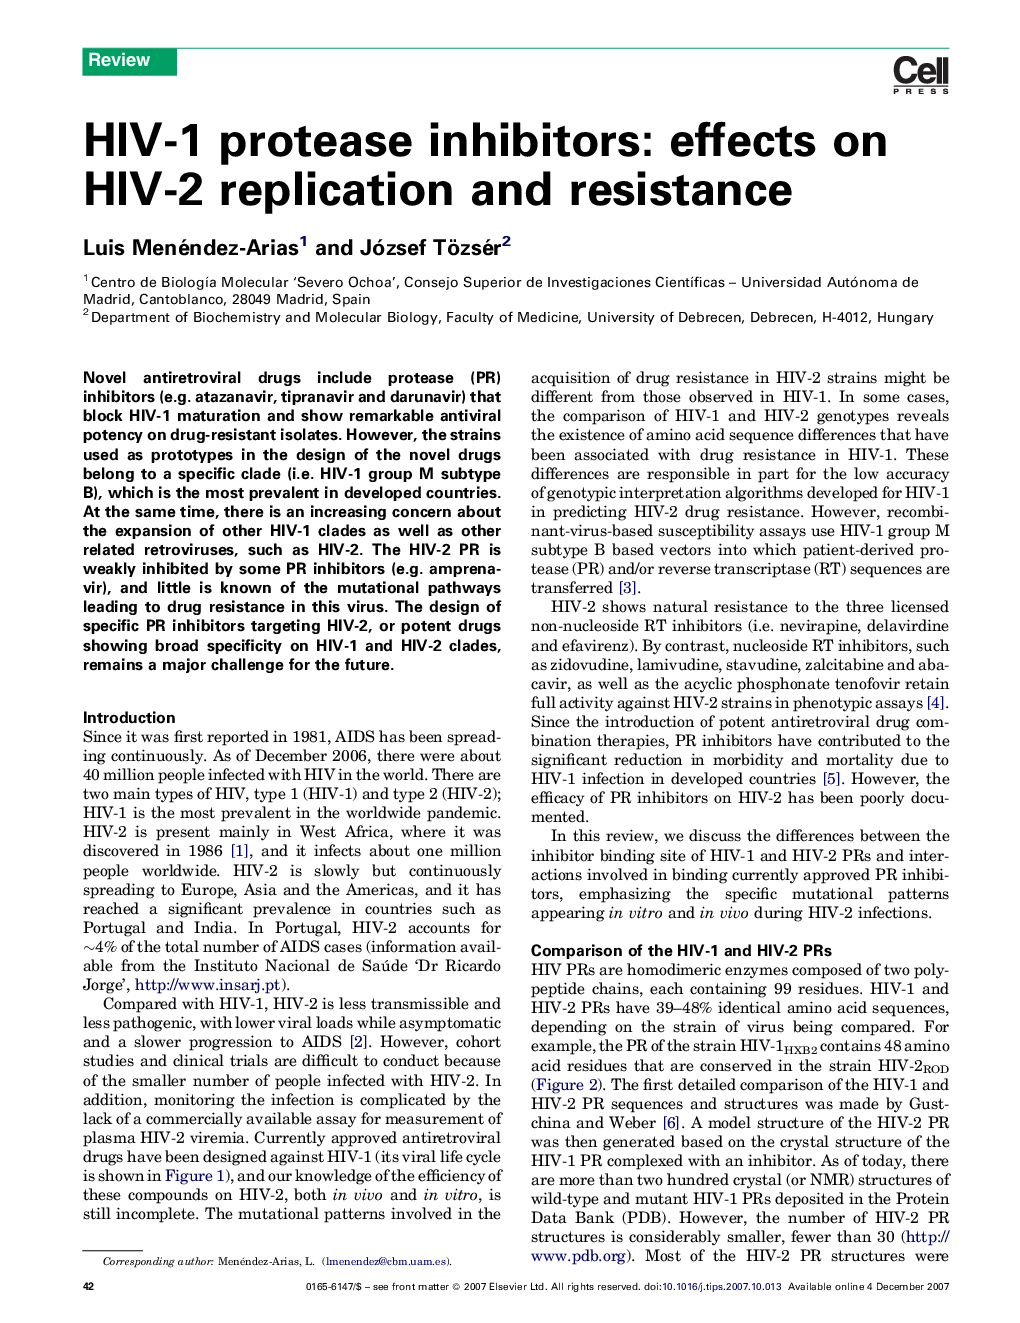 HIV-1 protease inhibitors: effects on HIV-2 replication and resistance